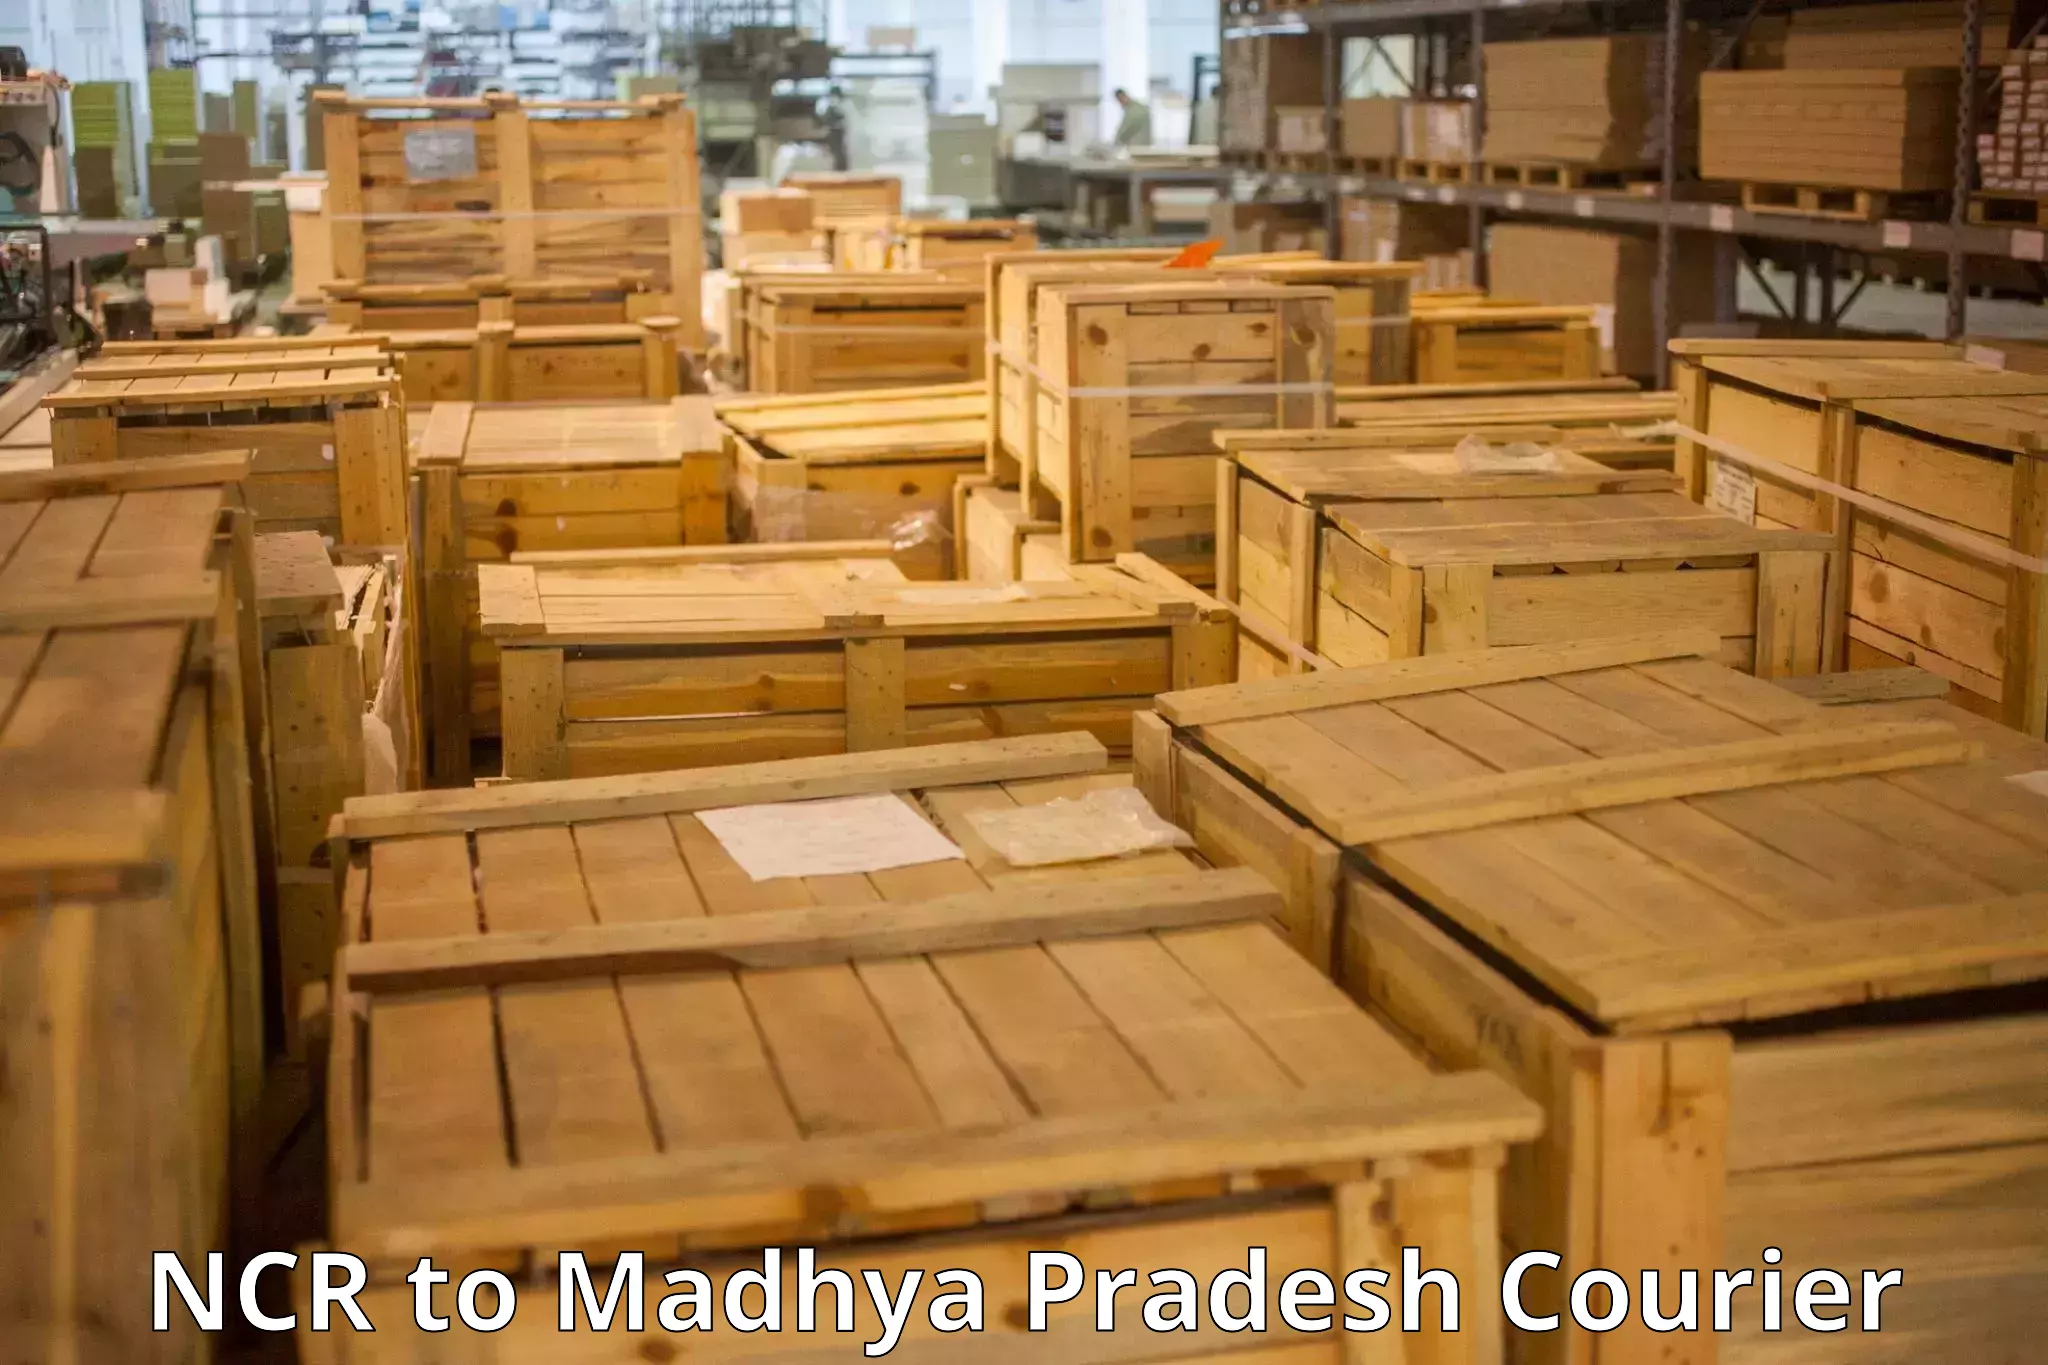 Luggage shipping specialists NCR to Madhya Pradesh